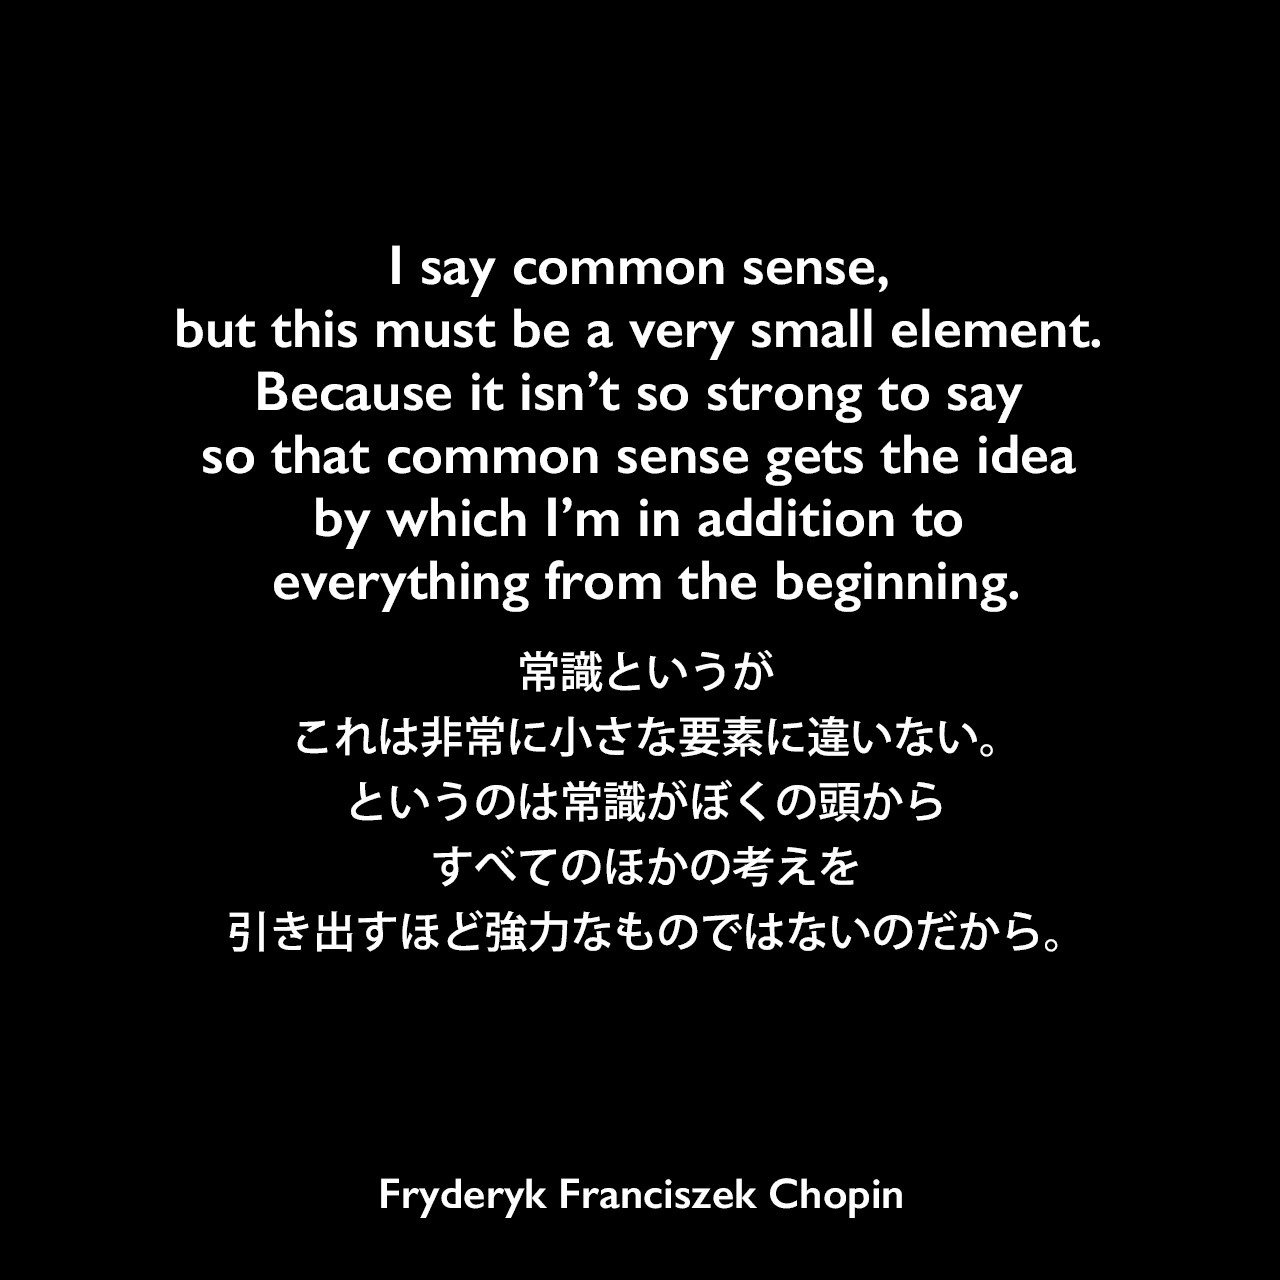 I say common sense, but this must be a very small element. Because it isn’t so strong to say so that common sense gets the idea by which I’m in addition to everything from the beginning.常識というが、これは非常に小さな要素に違いない。というのは常識がぼくの頭からすべてのほかの考えを引き出すほど強力なものではないのだから。Fryderyk Franciszek Chopin